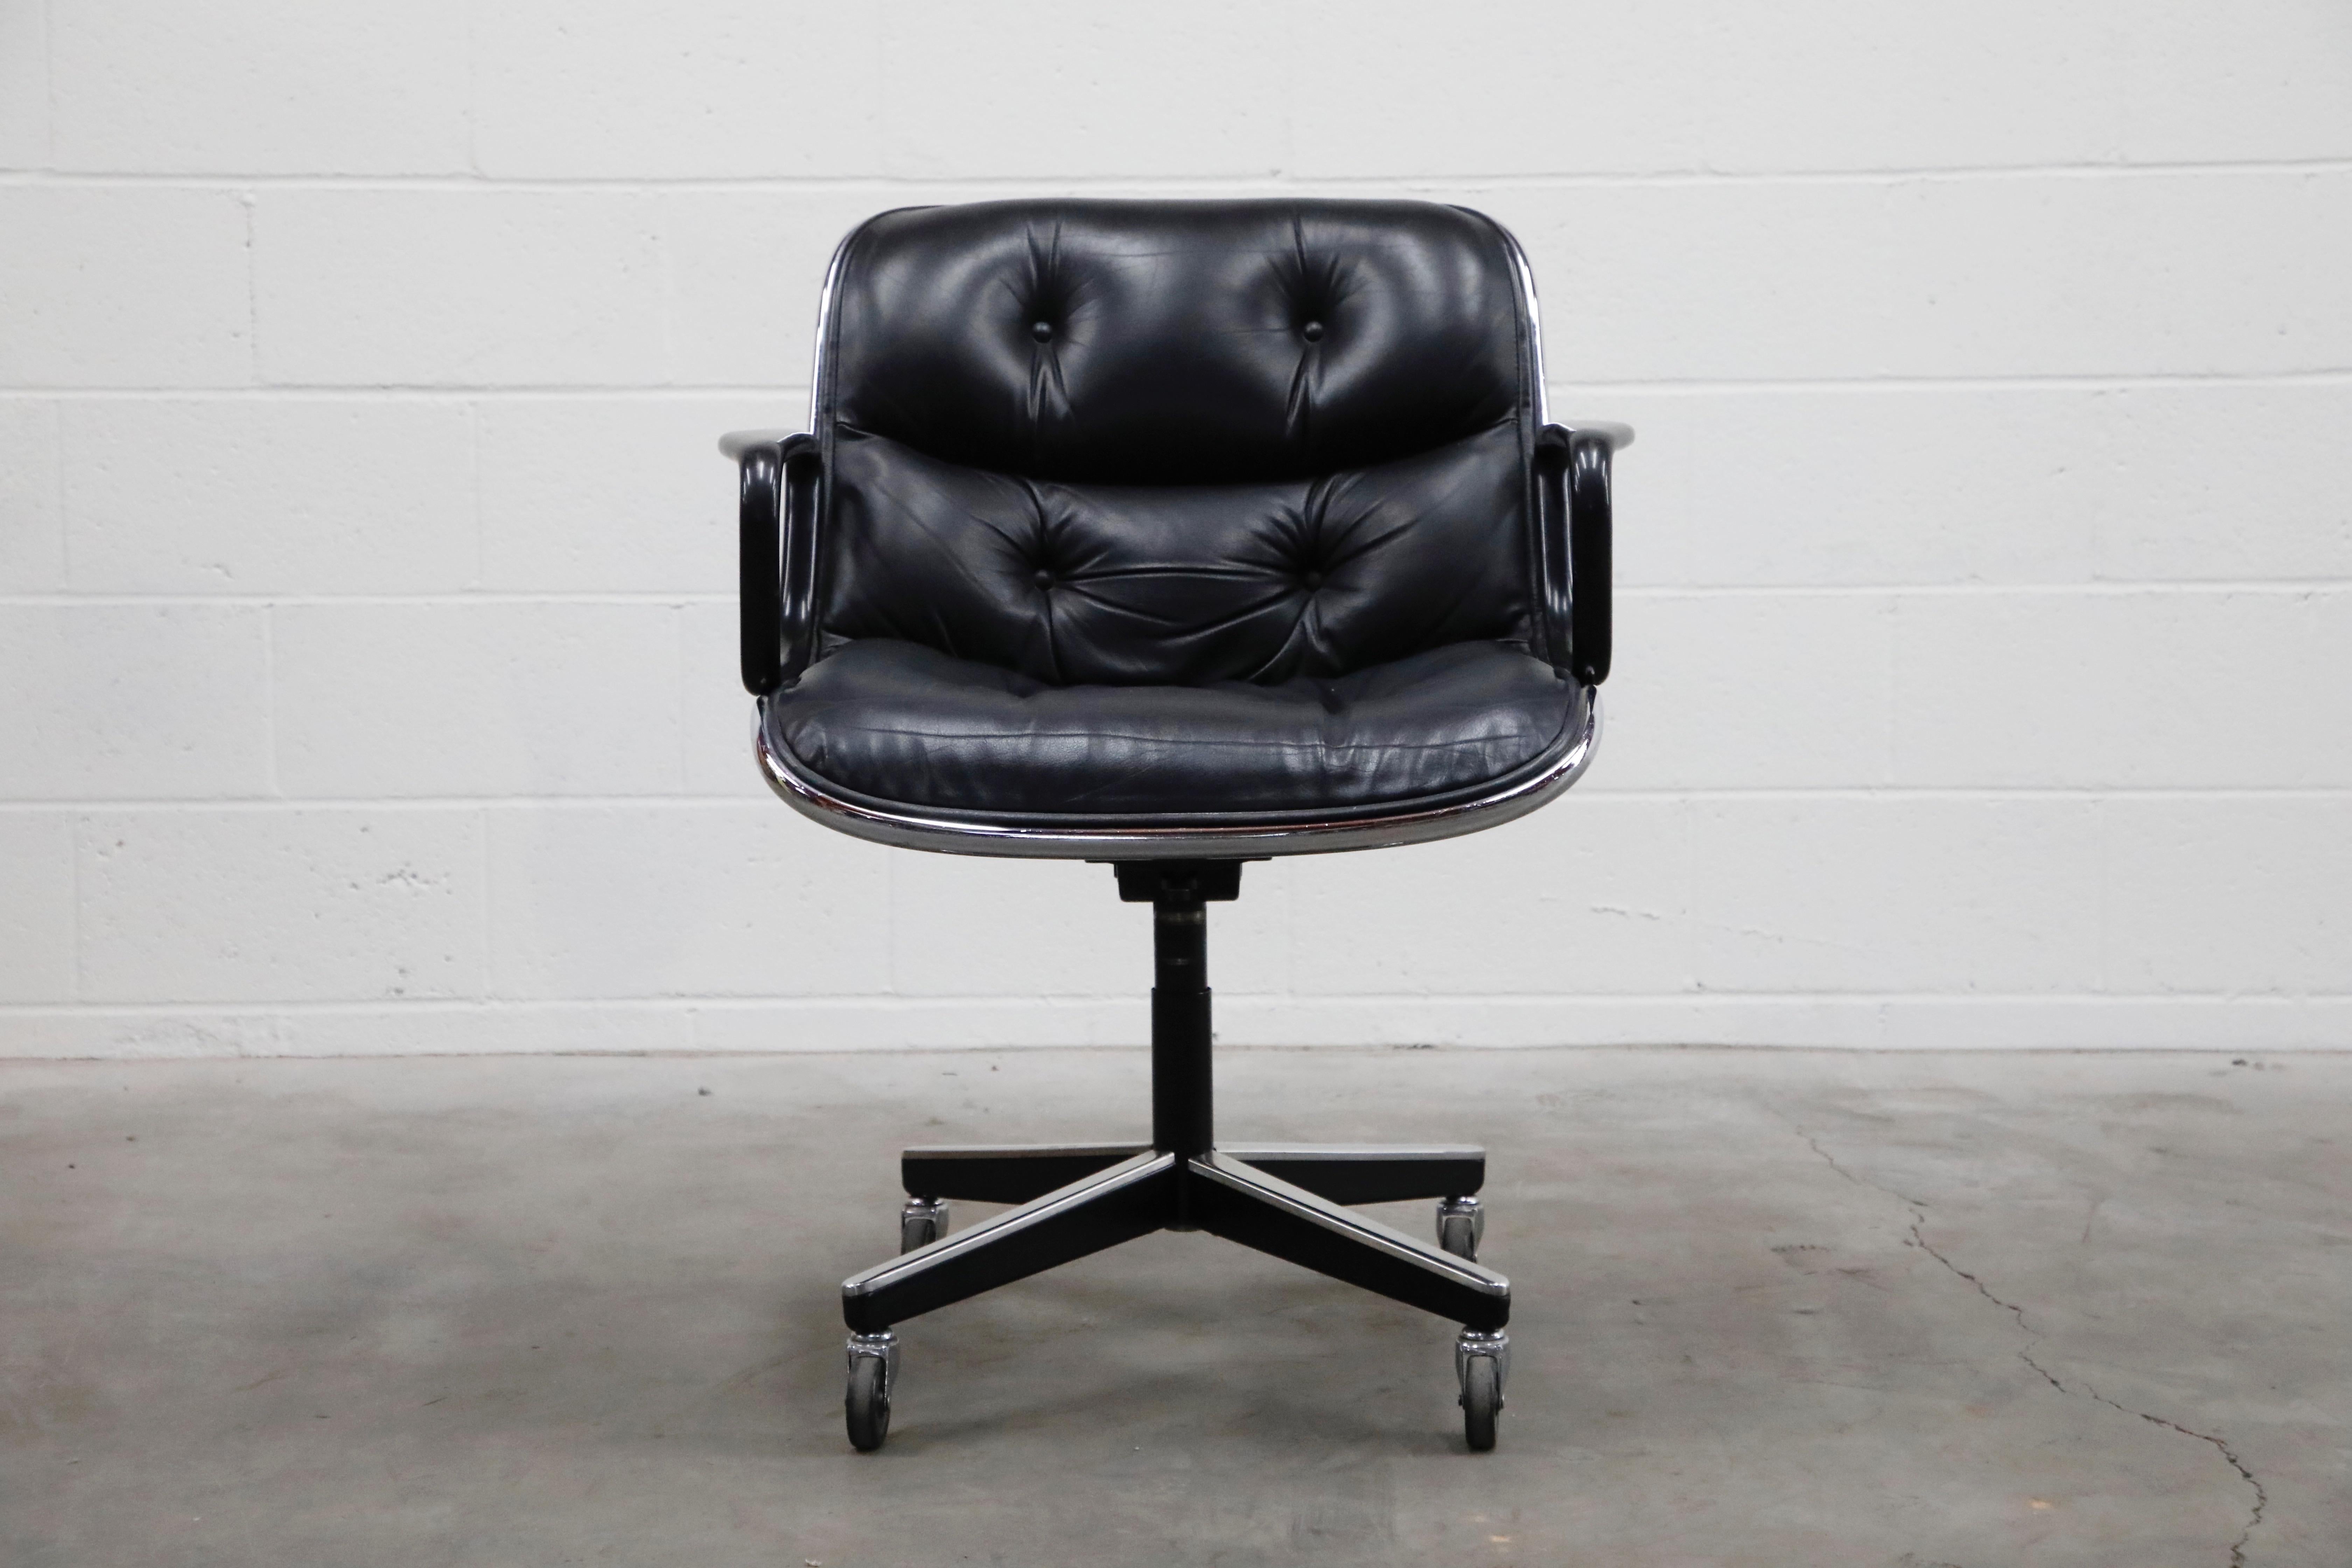 These Charles Pollock for Knoll International executive desk chairs are excellent collectors examples that have been well cared for over the decades, in exquisite black leather in very good to excellent vintage condition with light patina, and